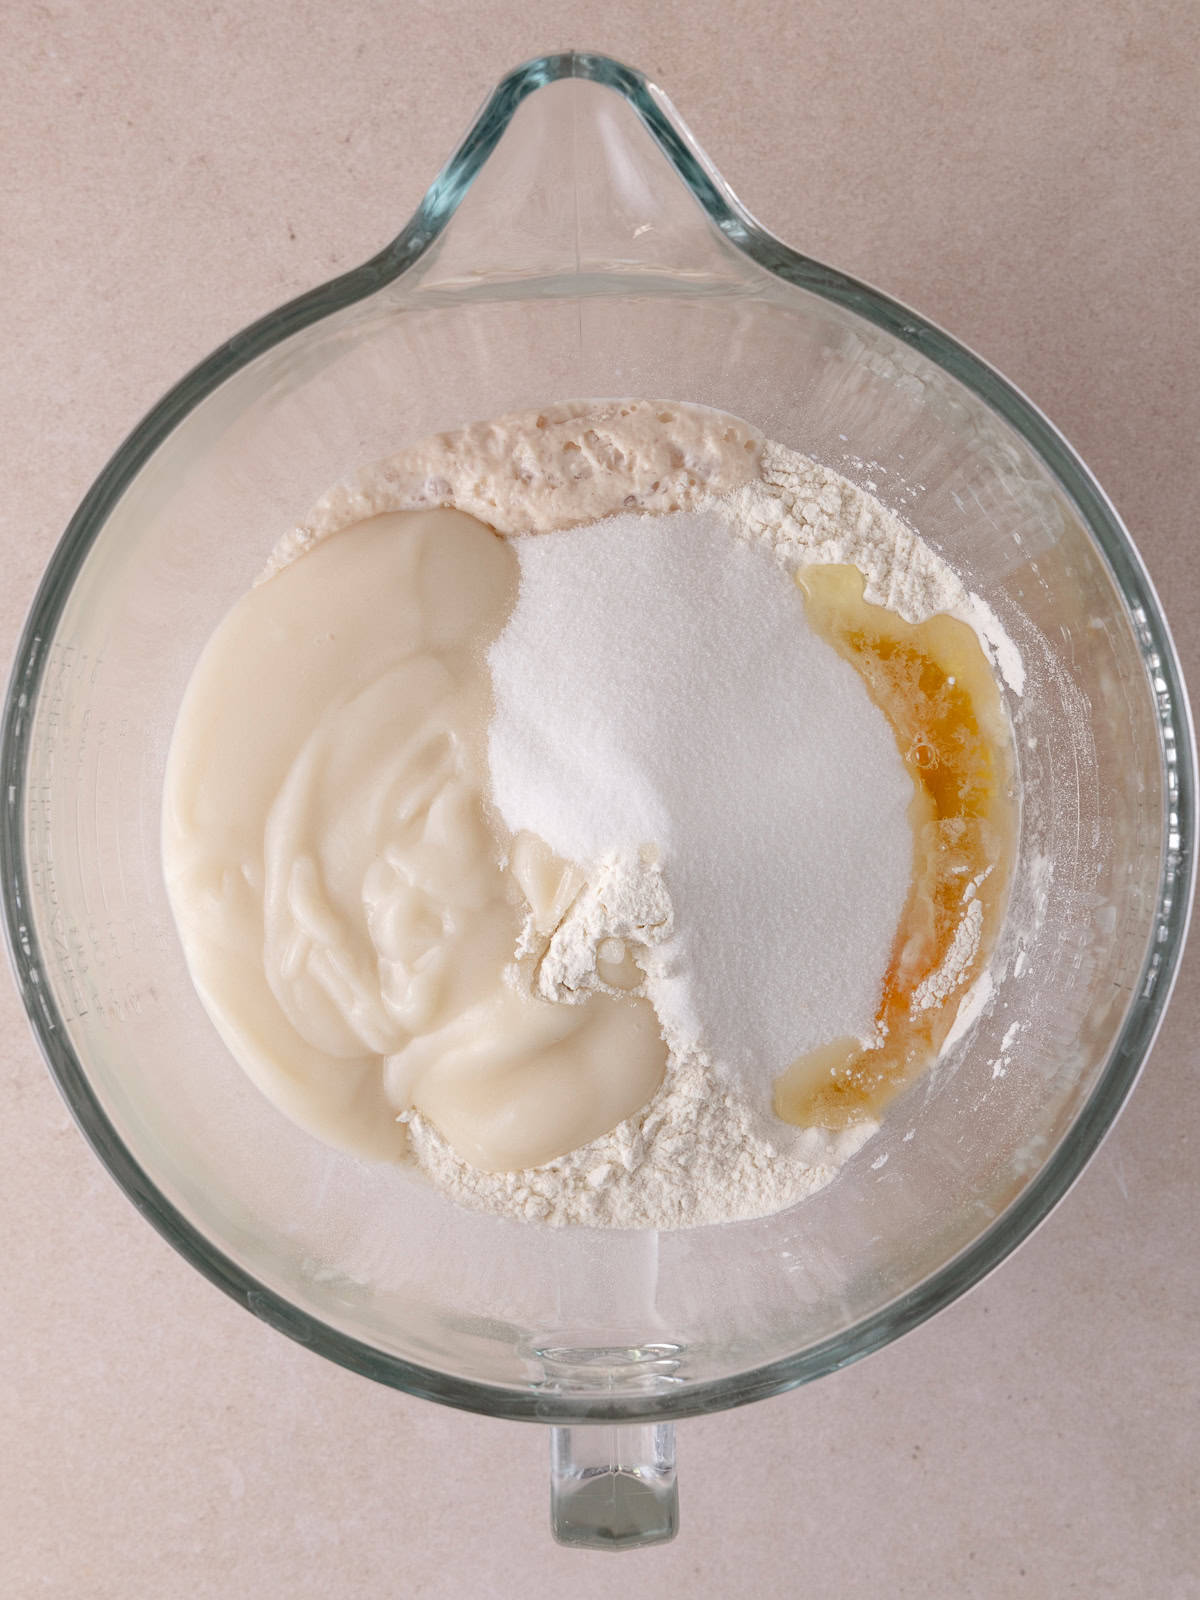 Bloomed yeast mixture, bread flour, all purpose flour, milk powder, tangzhong, eggs, sugar, and salt are added to a large mixing bowl.